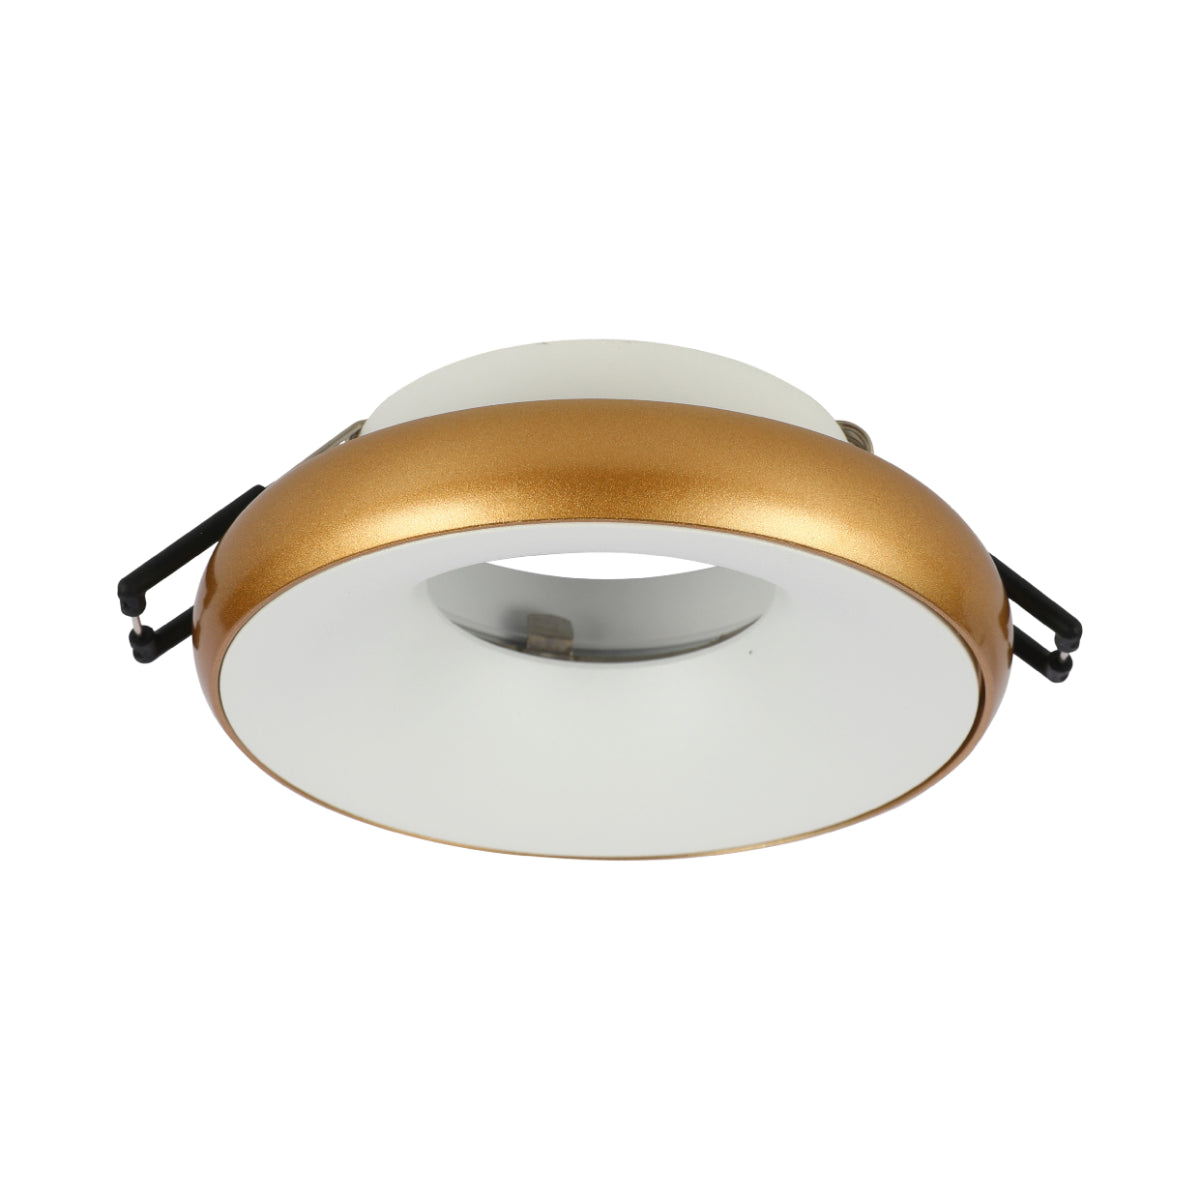 Main image of Die-Cast Aluminium Fixed GU10 Downlight with Color-Accented Bezel 143-04038